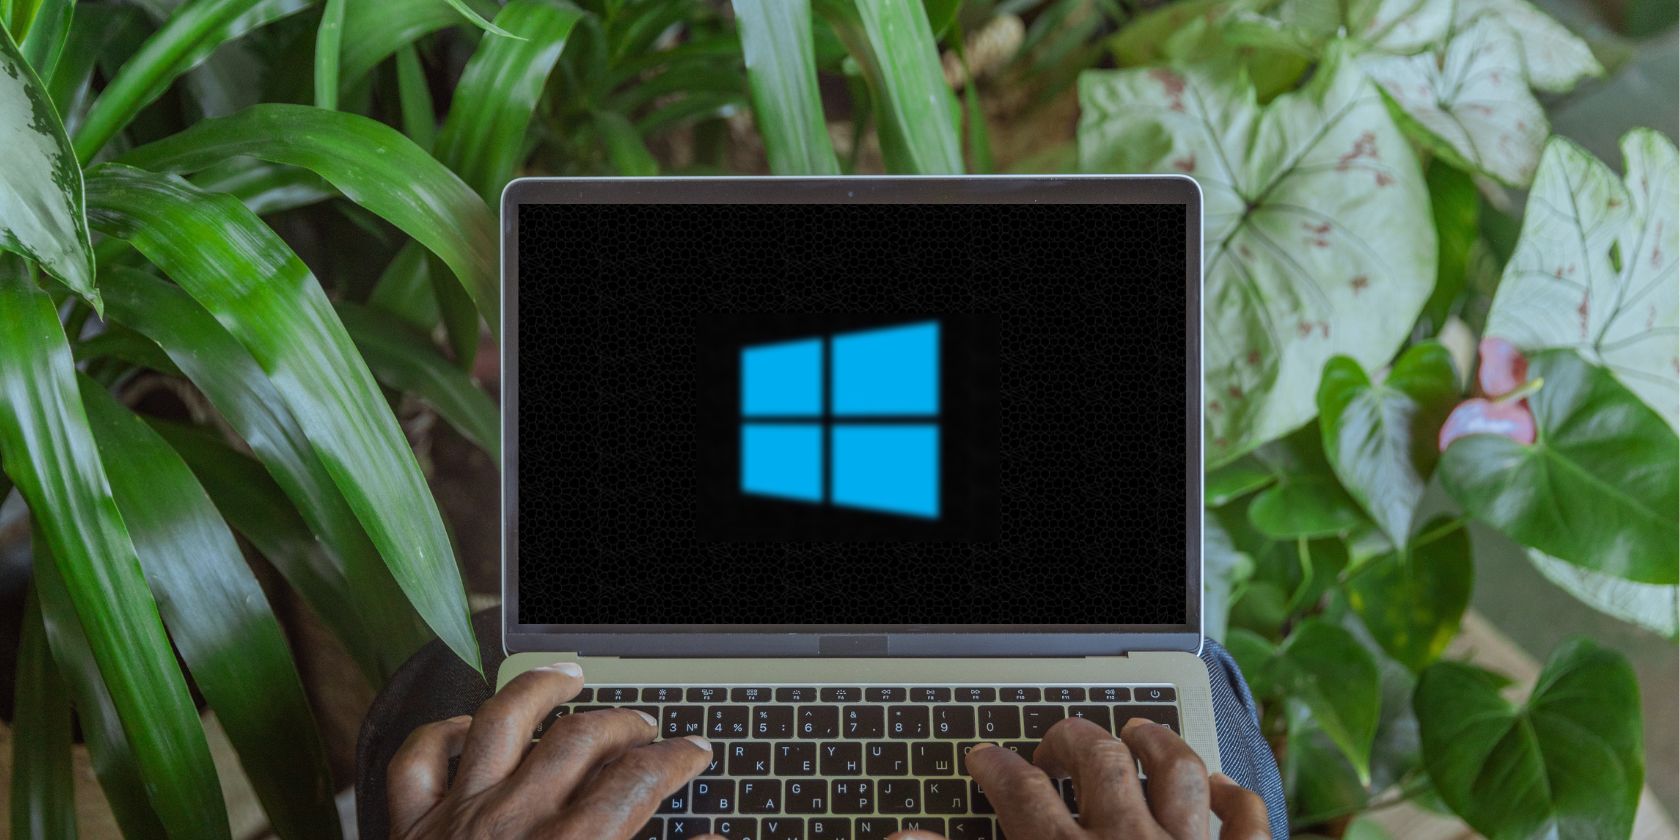 8 ways to fix blurry screen issues on windows 11